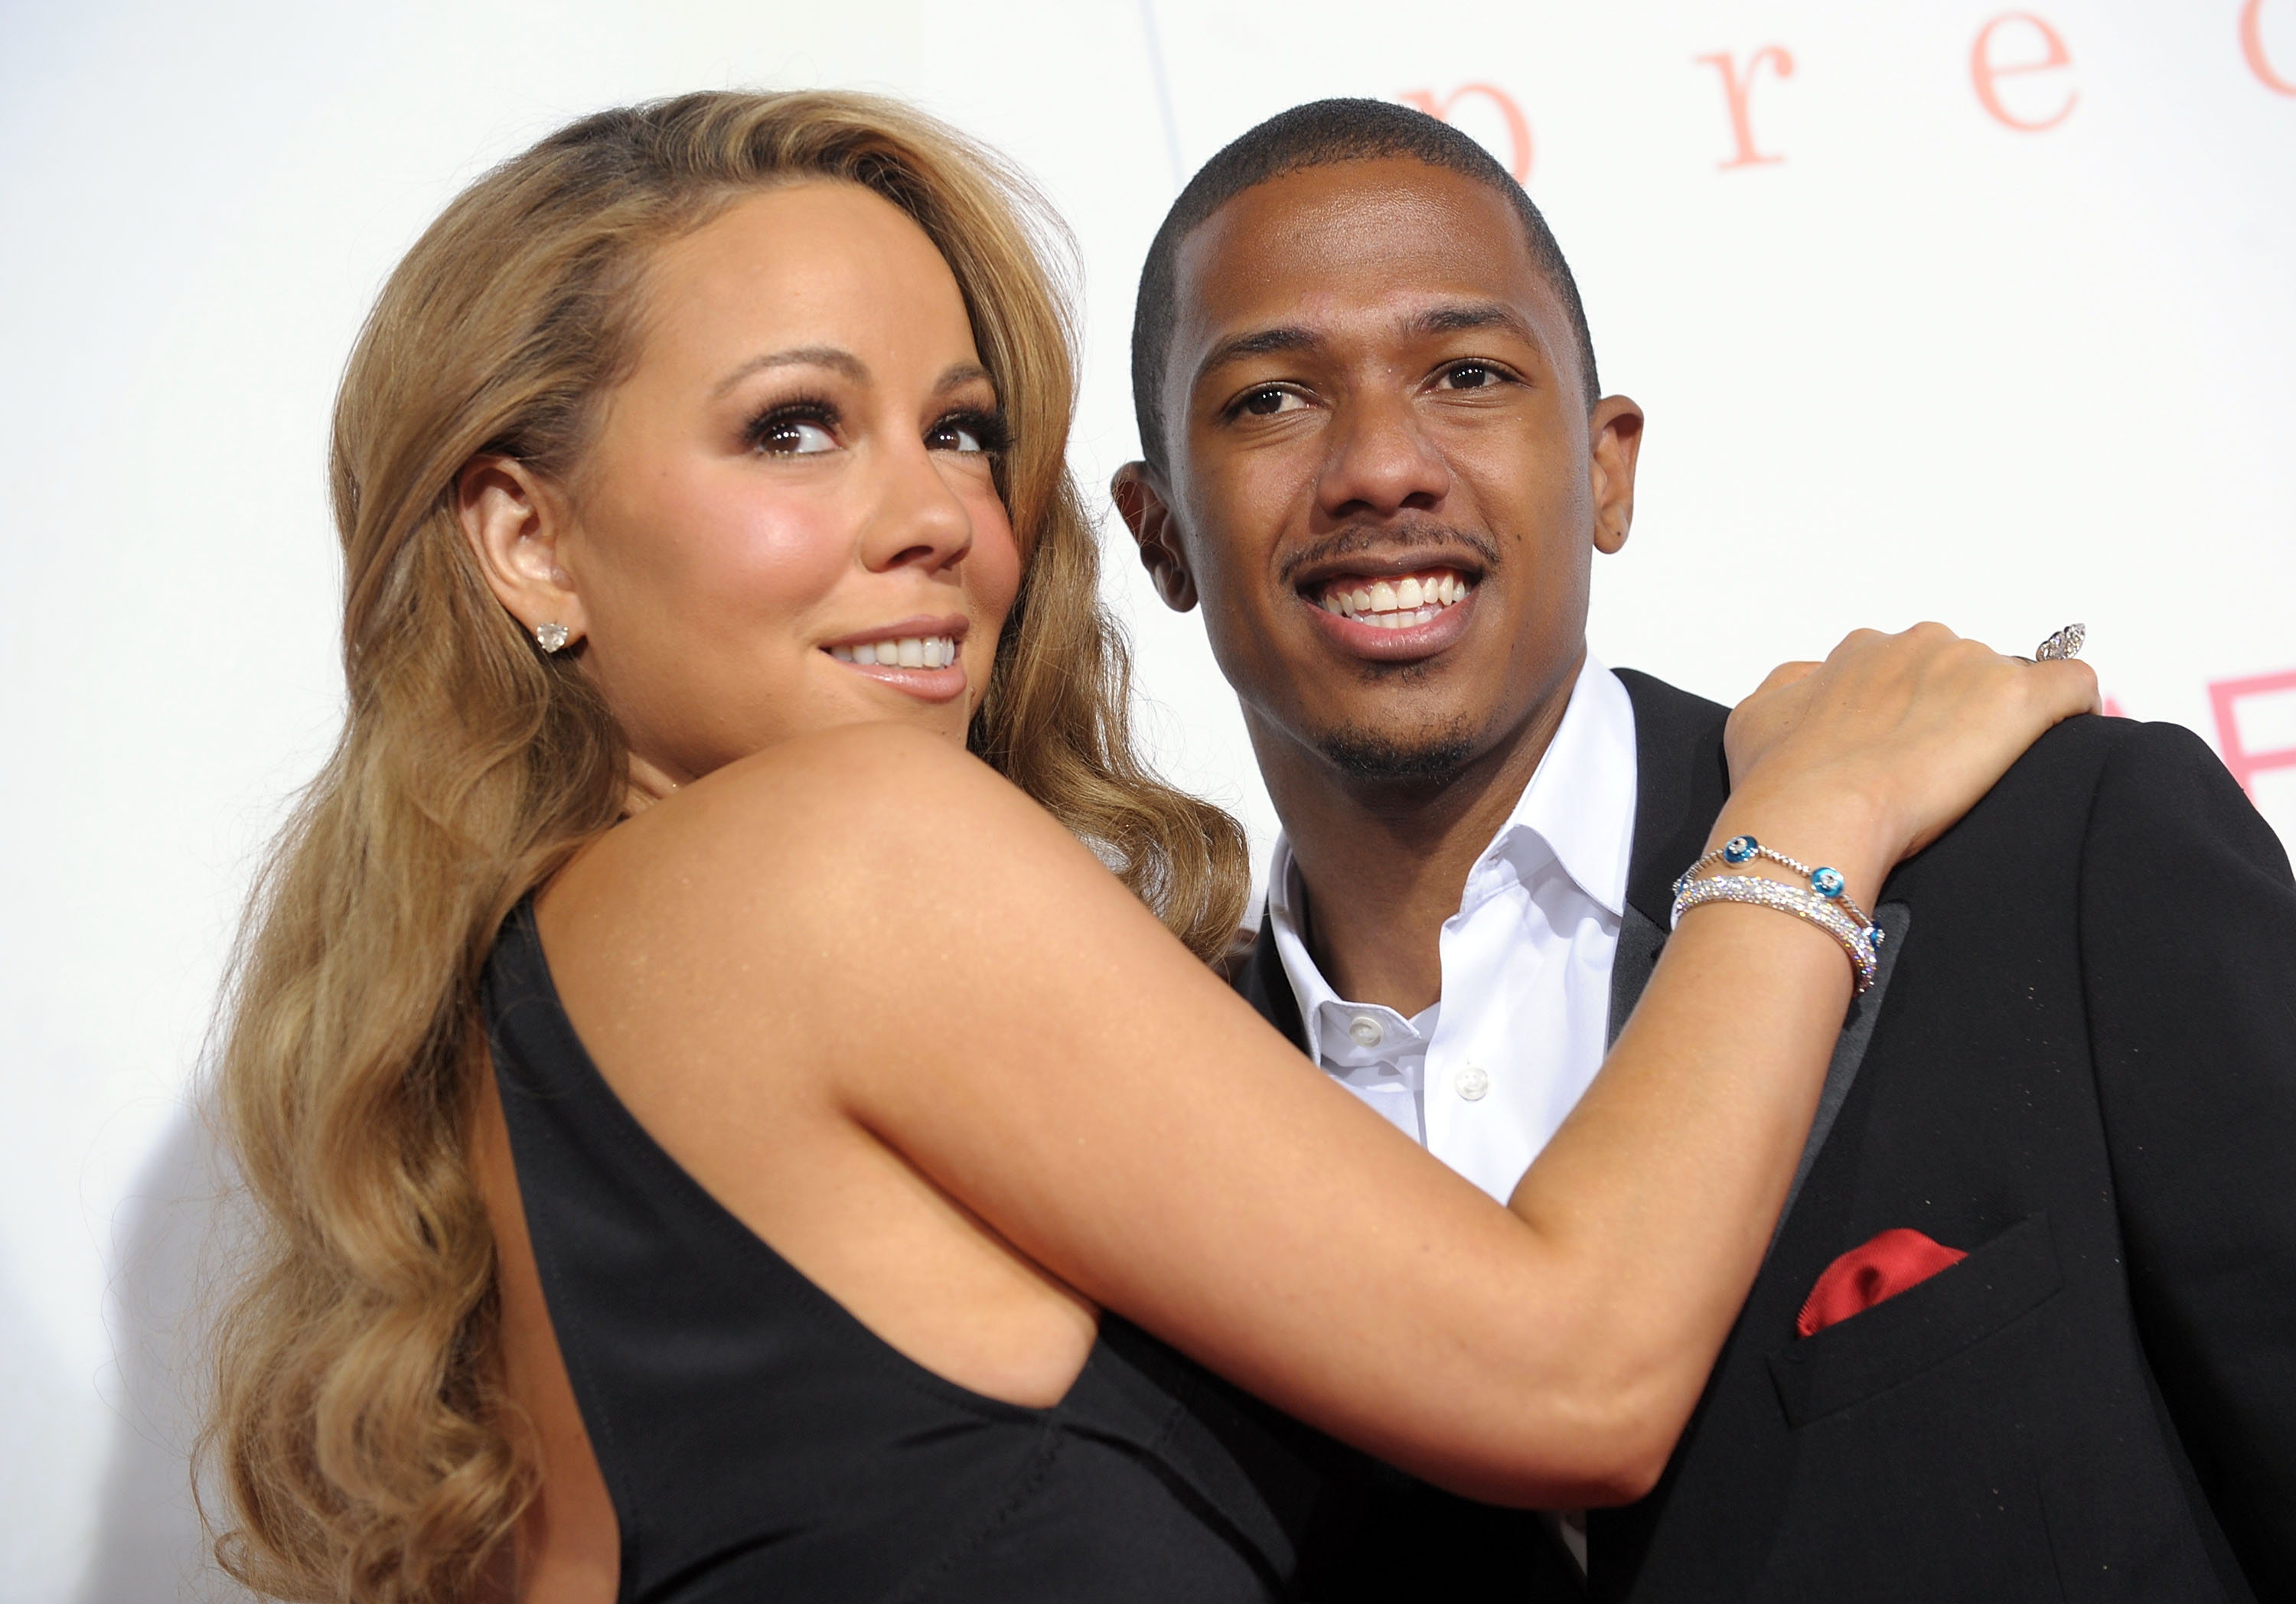 Nick Cannon Says Mariah Carey Makes Sure He Doesn’t Bring His “Bullsh*t” Into Her Home